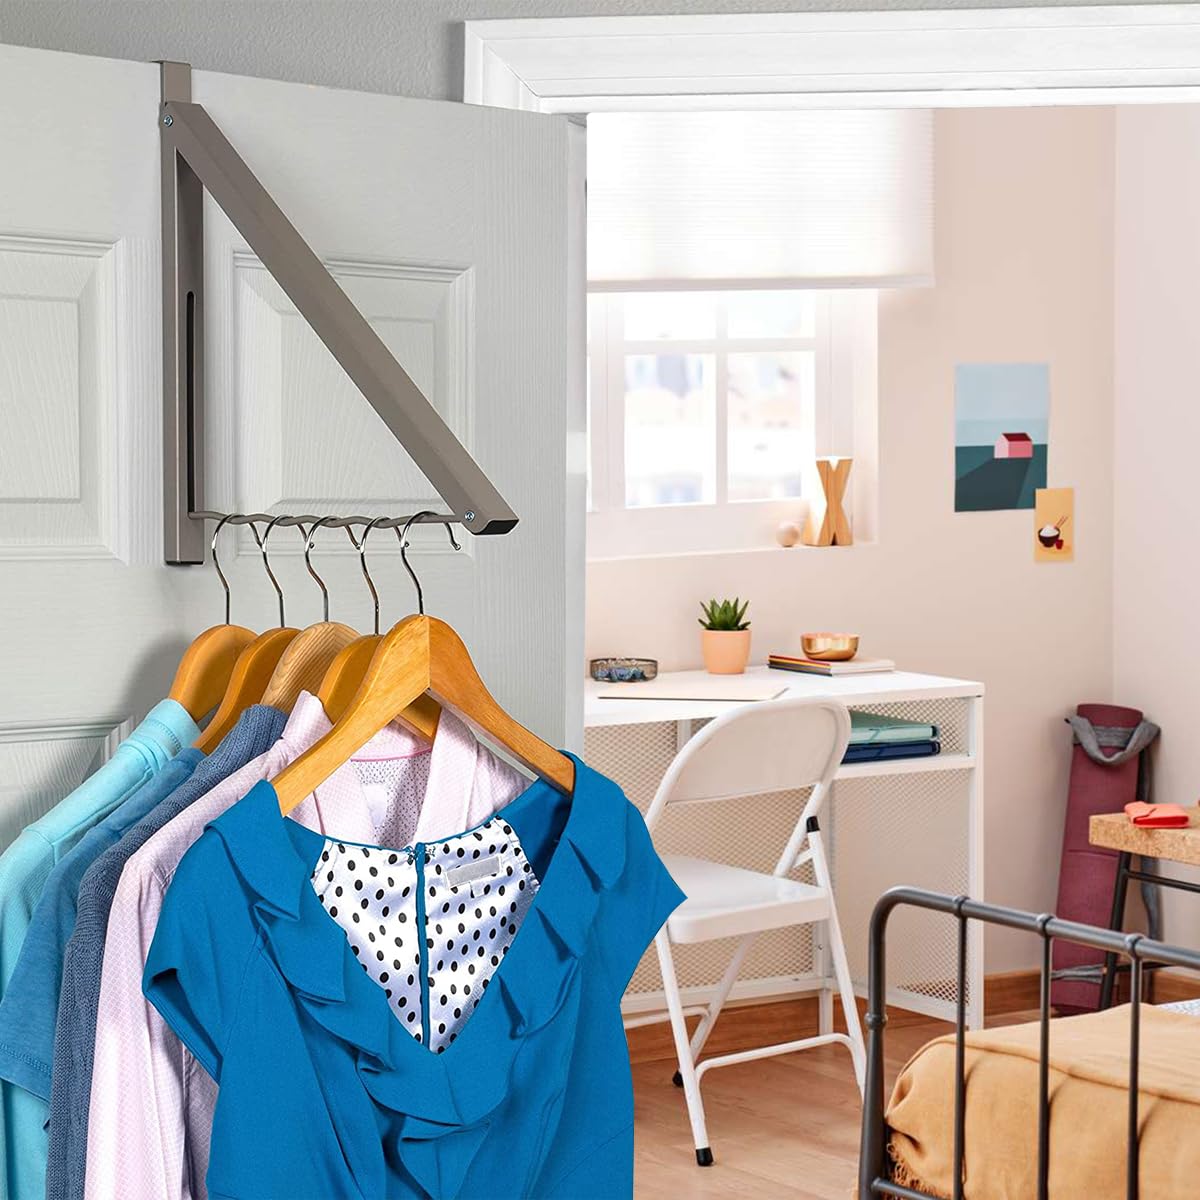 Over the Door Hanger - Closet Hanger Retractable Collapsible Folding Hanging Rack Organizer Perfect for Clothes & Towels Ideal for Bathrooms, Dorm Rooms Etc. - Satin Nickel (Includes one Hook)  - Very Good